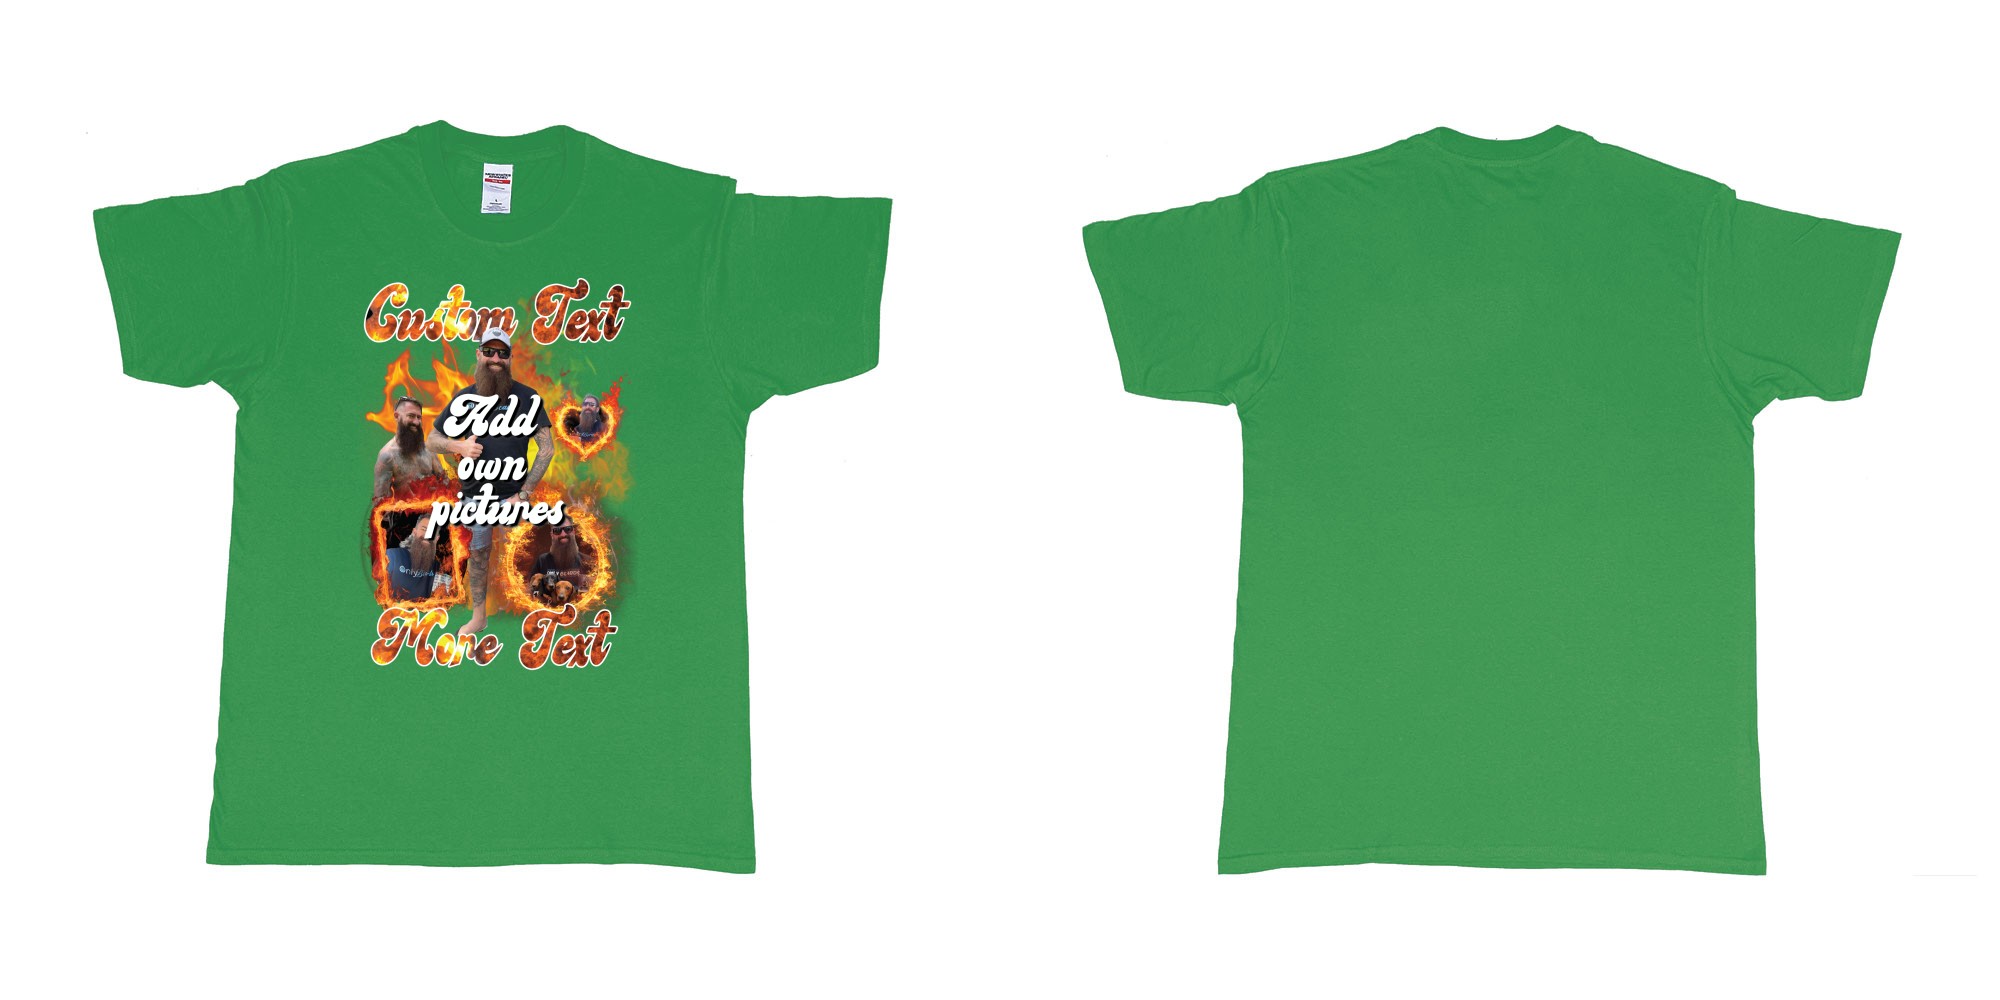 Custom tshirt design fire frames own custom pictures and text in fabric color irish-green choice your own text made in Bali by The Pirate Way